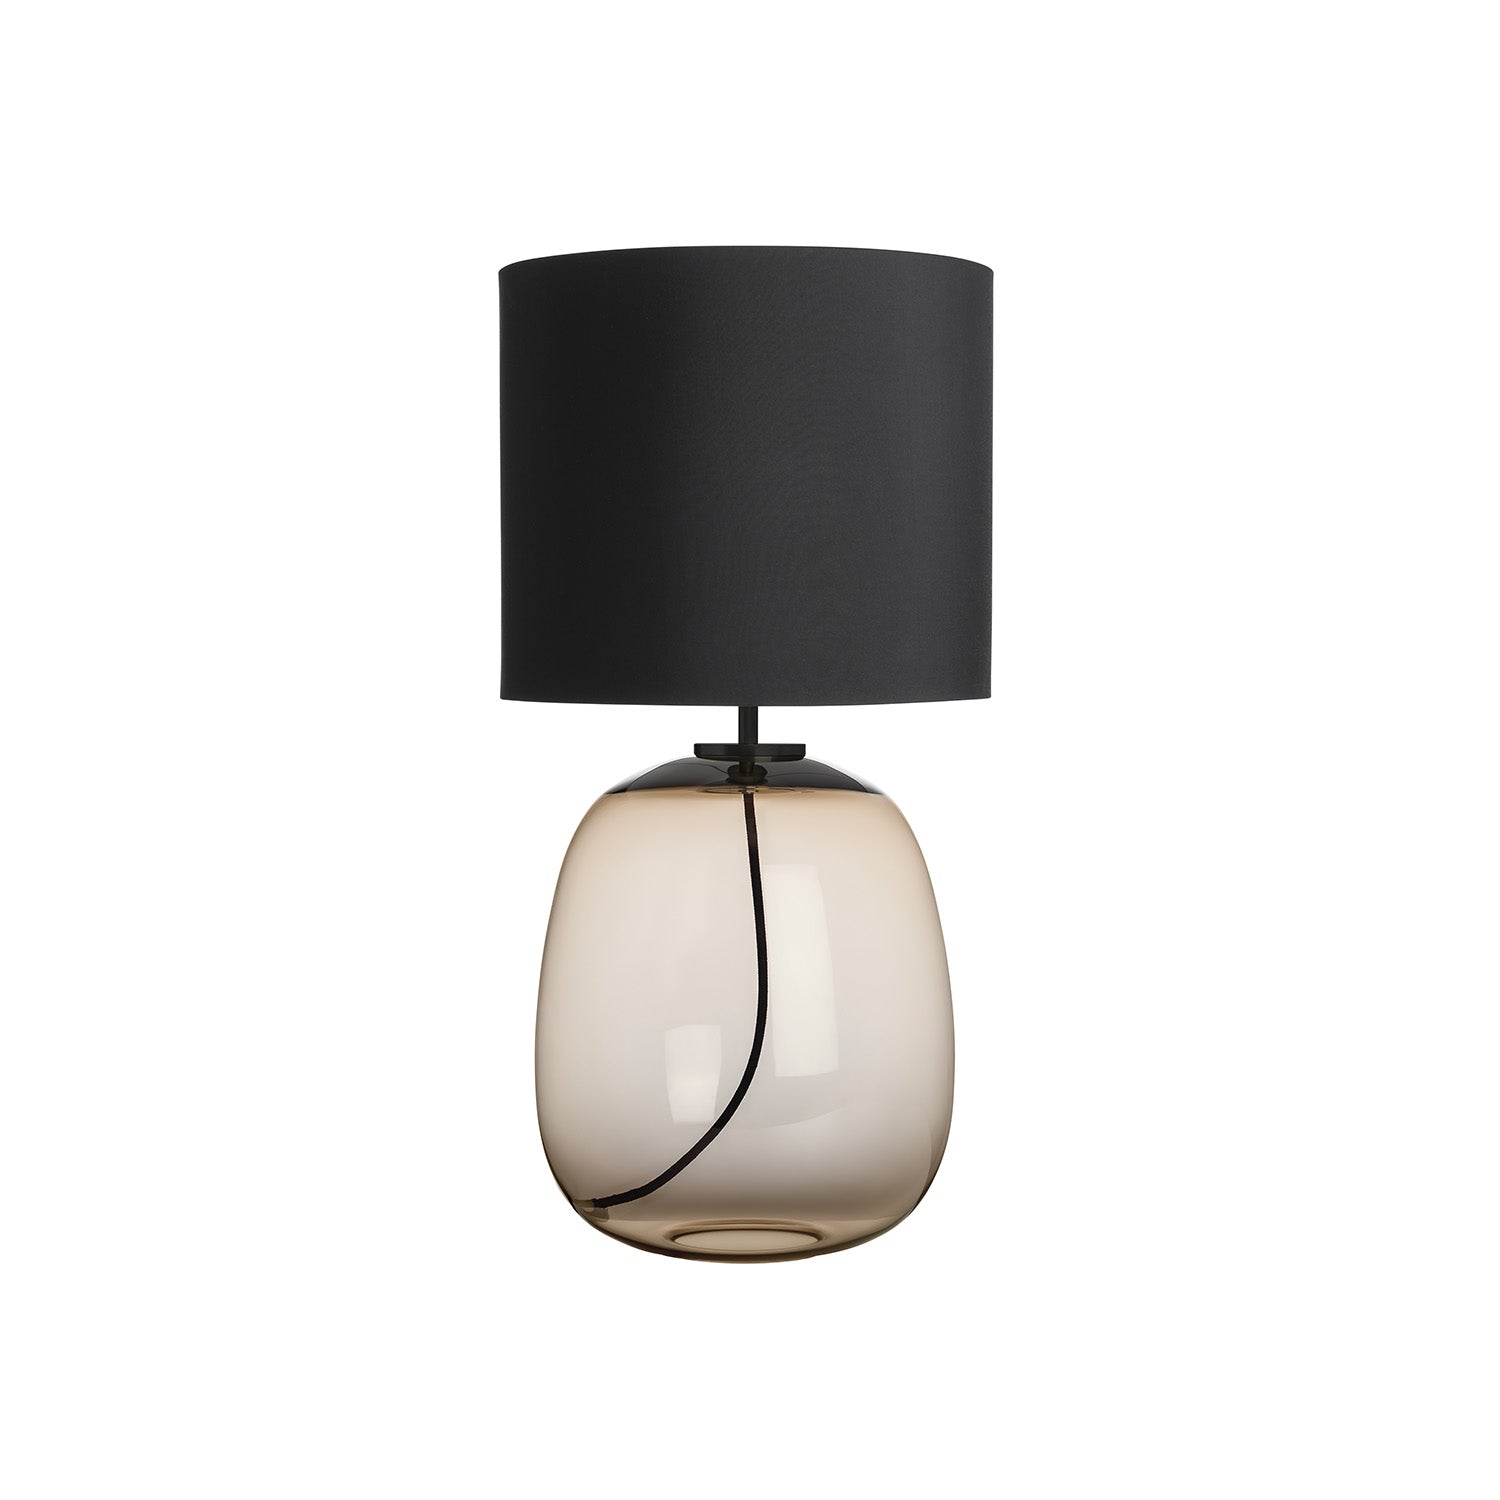 AUSTRA - Handcrafted blown glass table lamp